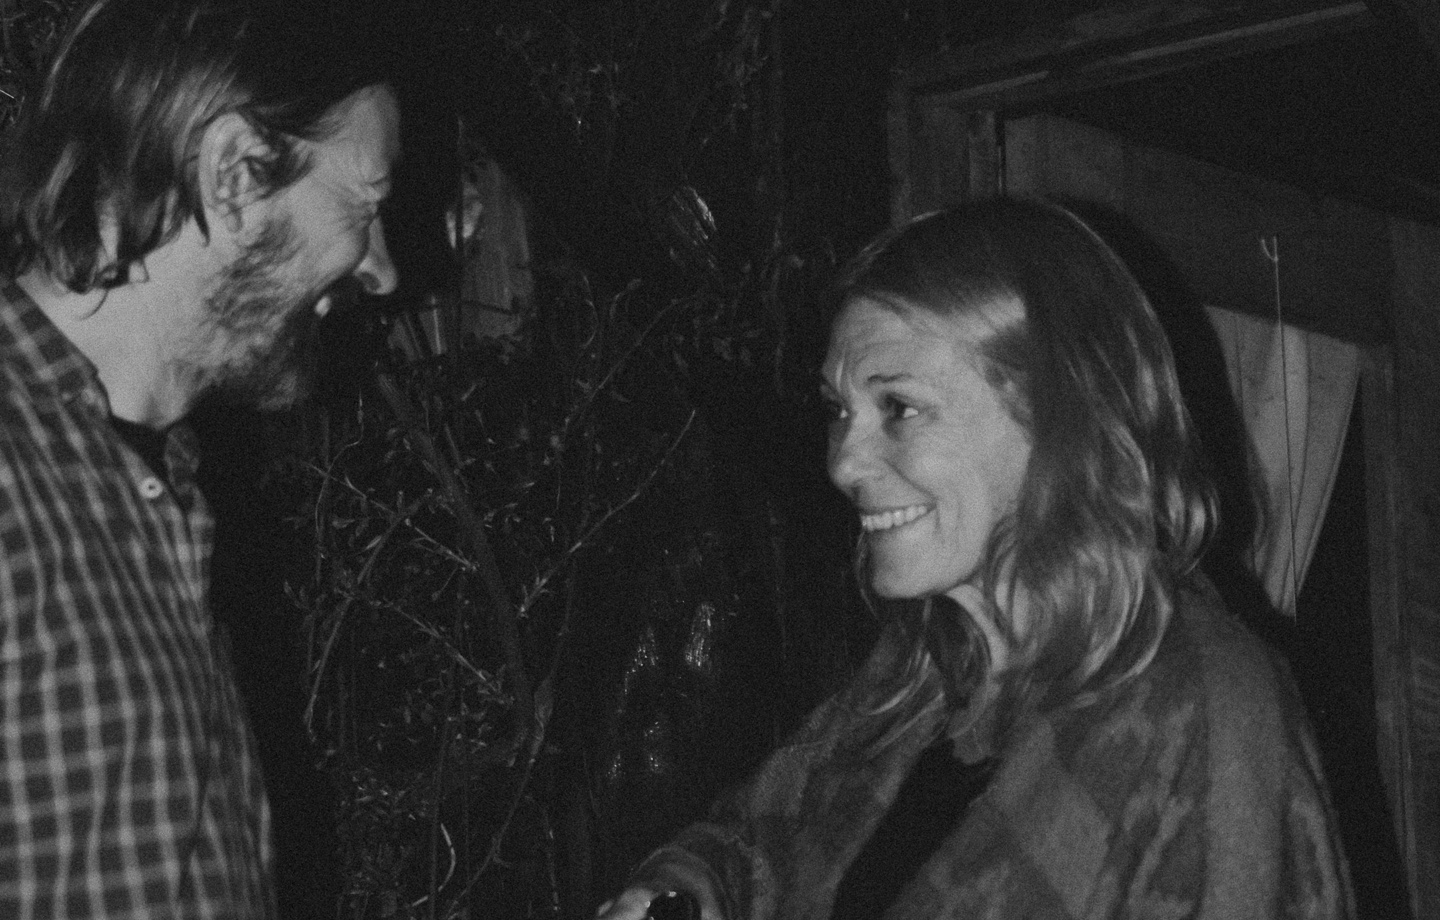 grainy black and white photo of a man and woman talking outside